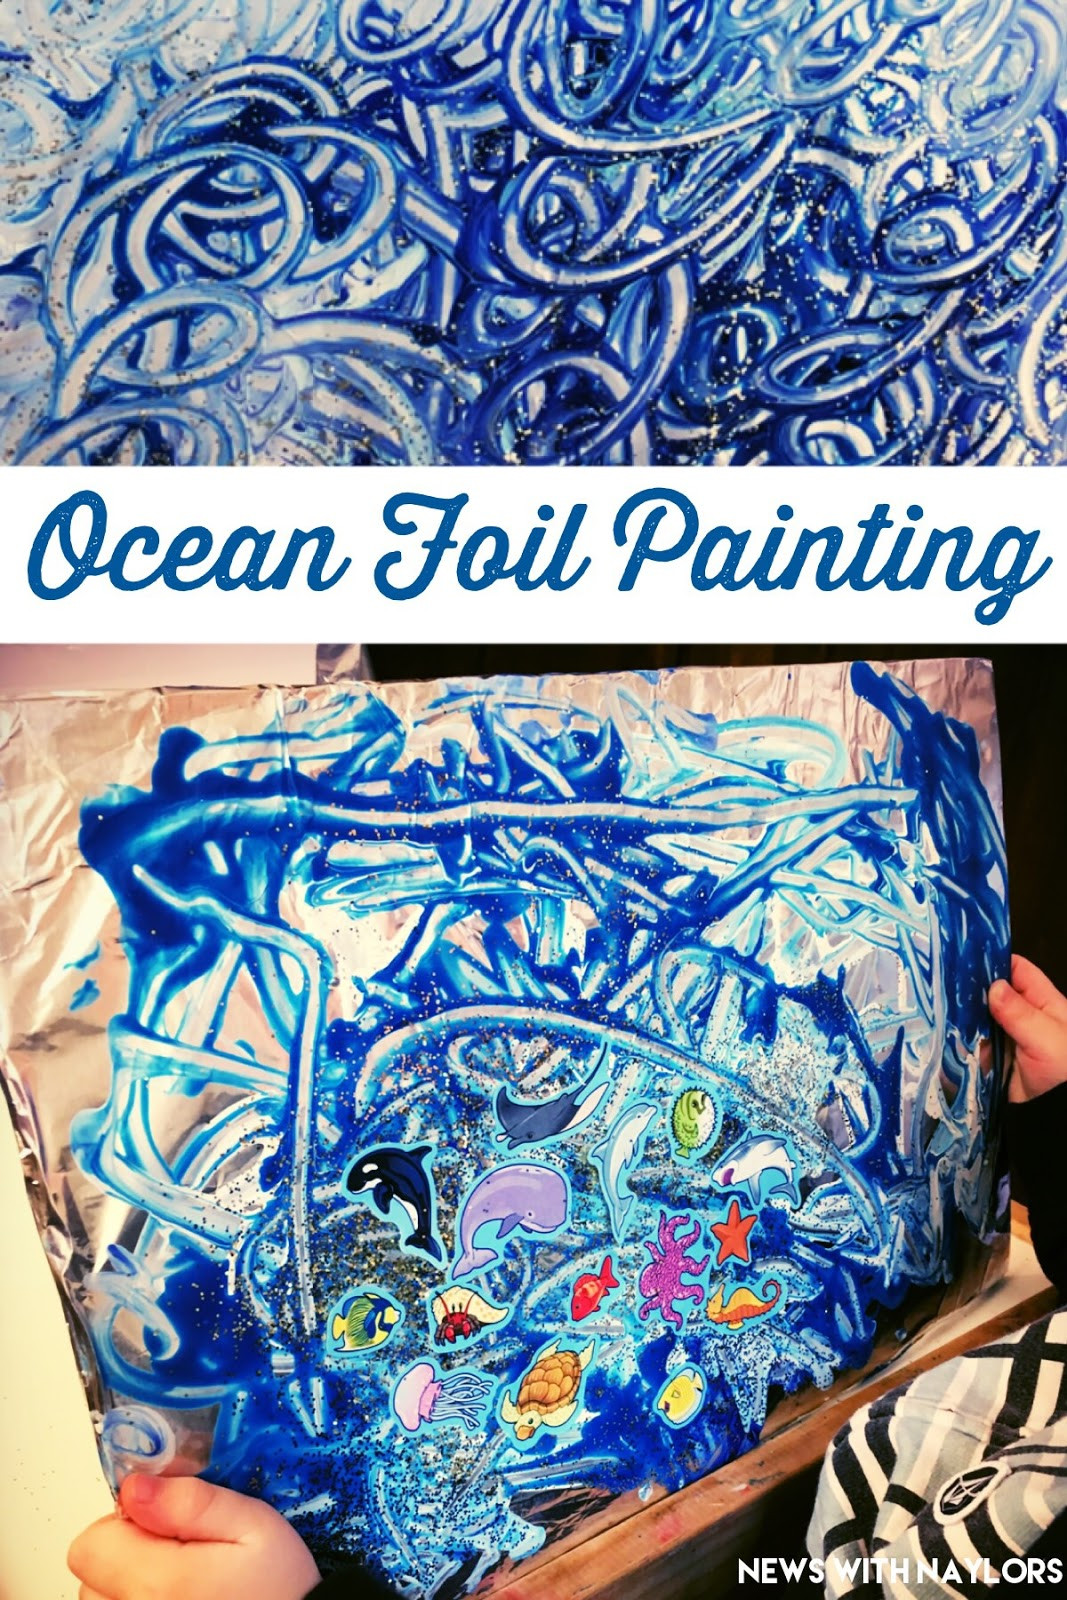 Art Ideas For Preschoolers
 News with Naylors Ocean Foil Painting